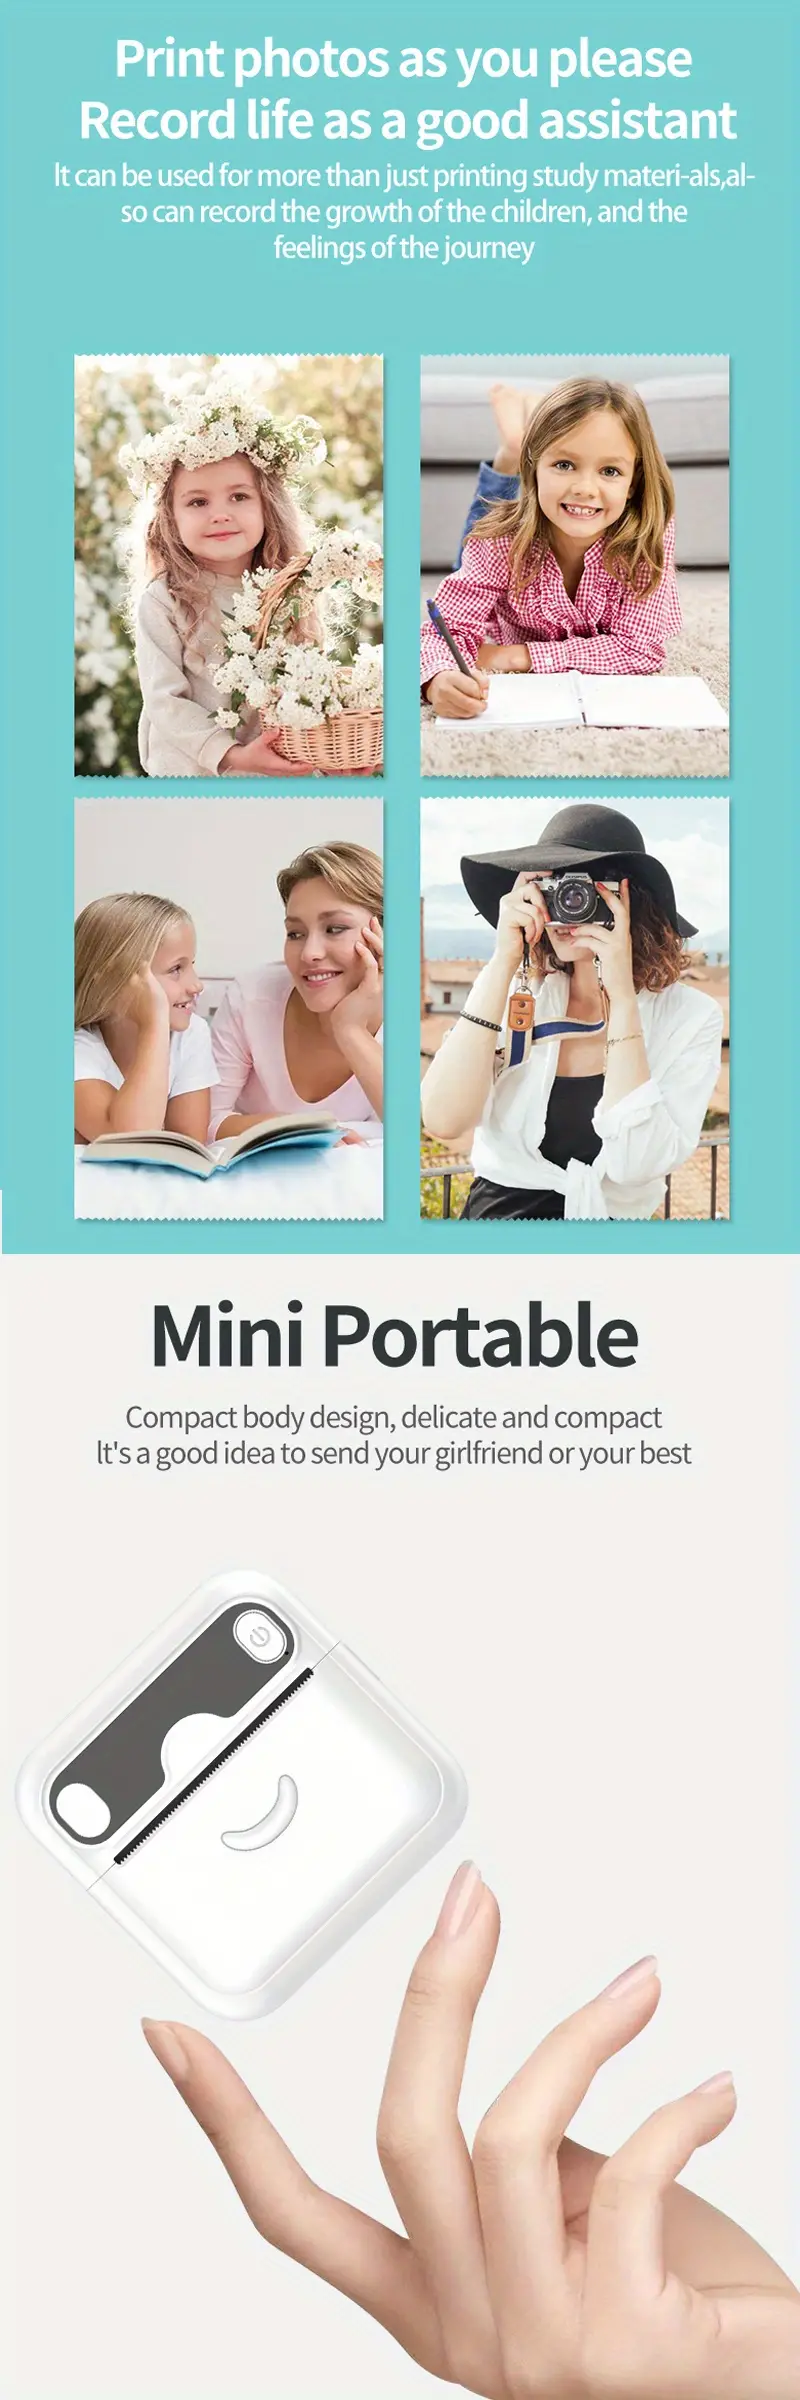 mini thermal printer print photos materials labels documents connect mobile phone wireless download app wireless mobile students office stationery send print paper instructions charging lines details 5